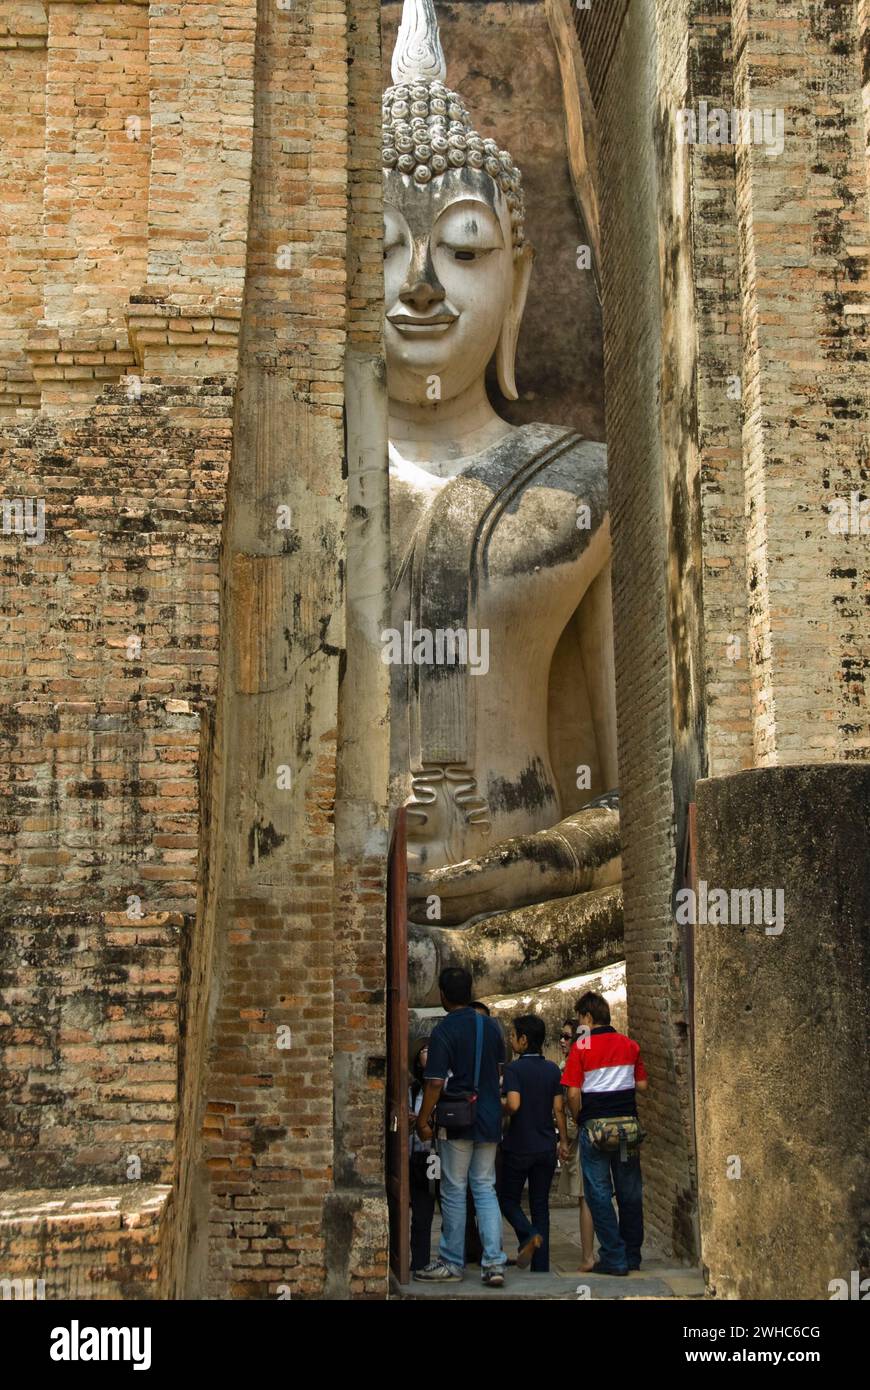 Buddhafigur in the thai temple Wat Si Chum in the ancient kingresidence of Sukhothai Stock Photo